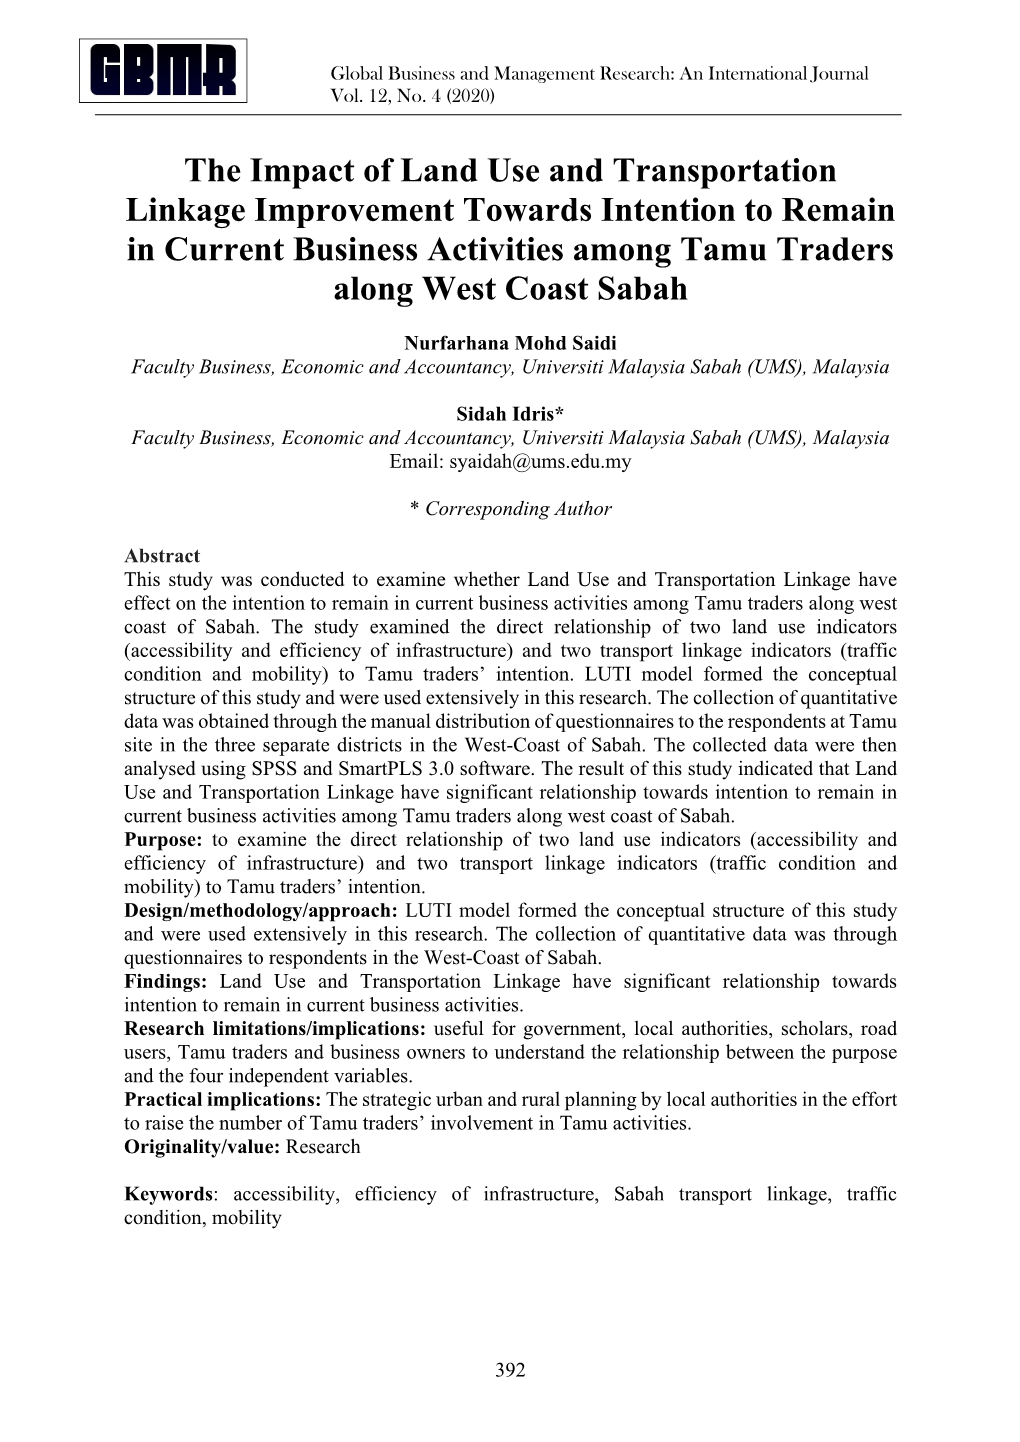 The Impact of Land Use and Transportation Linkage Improvement Towards Intention to Remain in Current Business Activities Among Tamu Traders Along West Coast Sabah